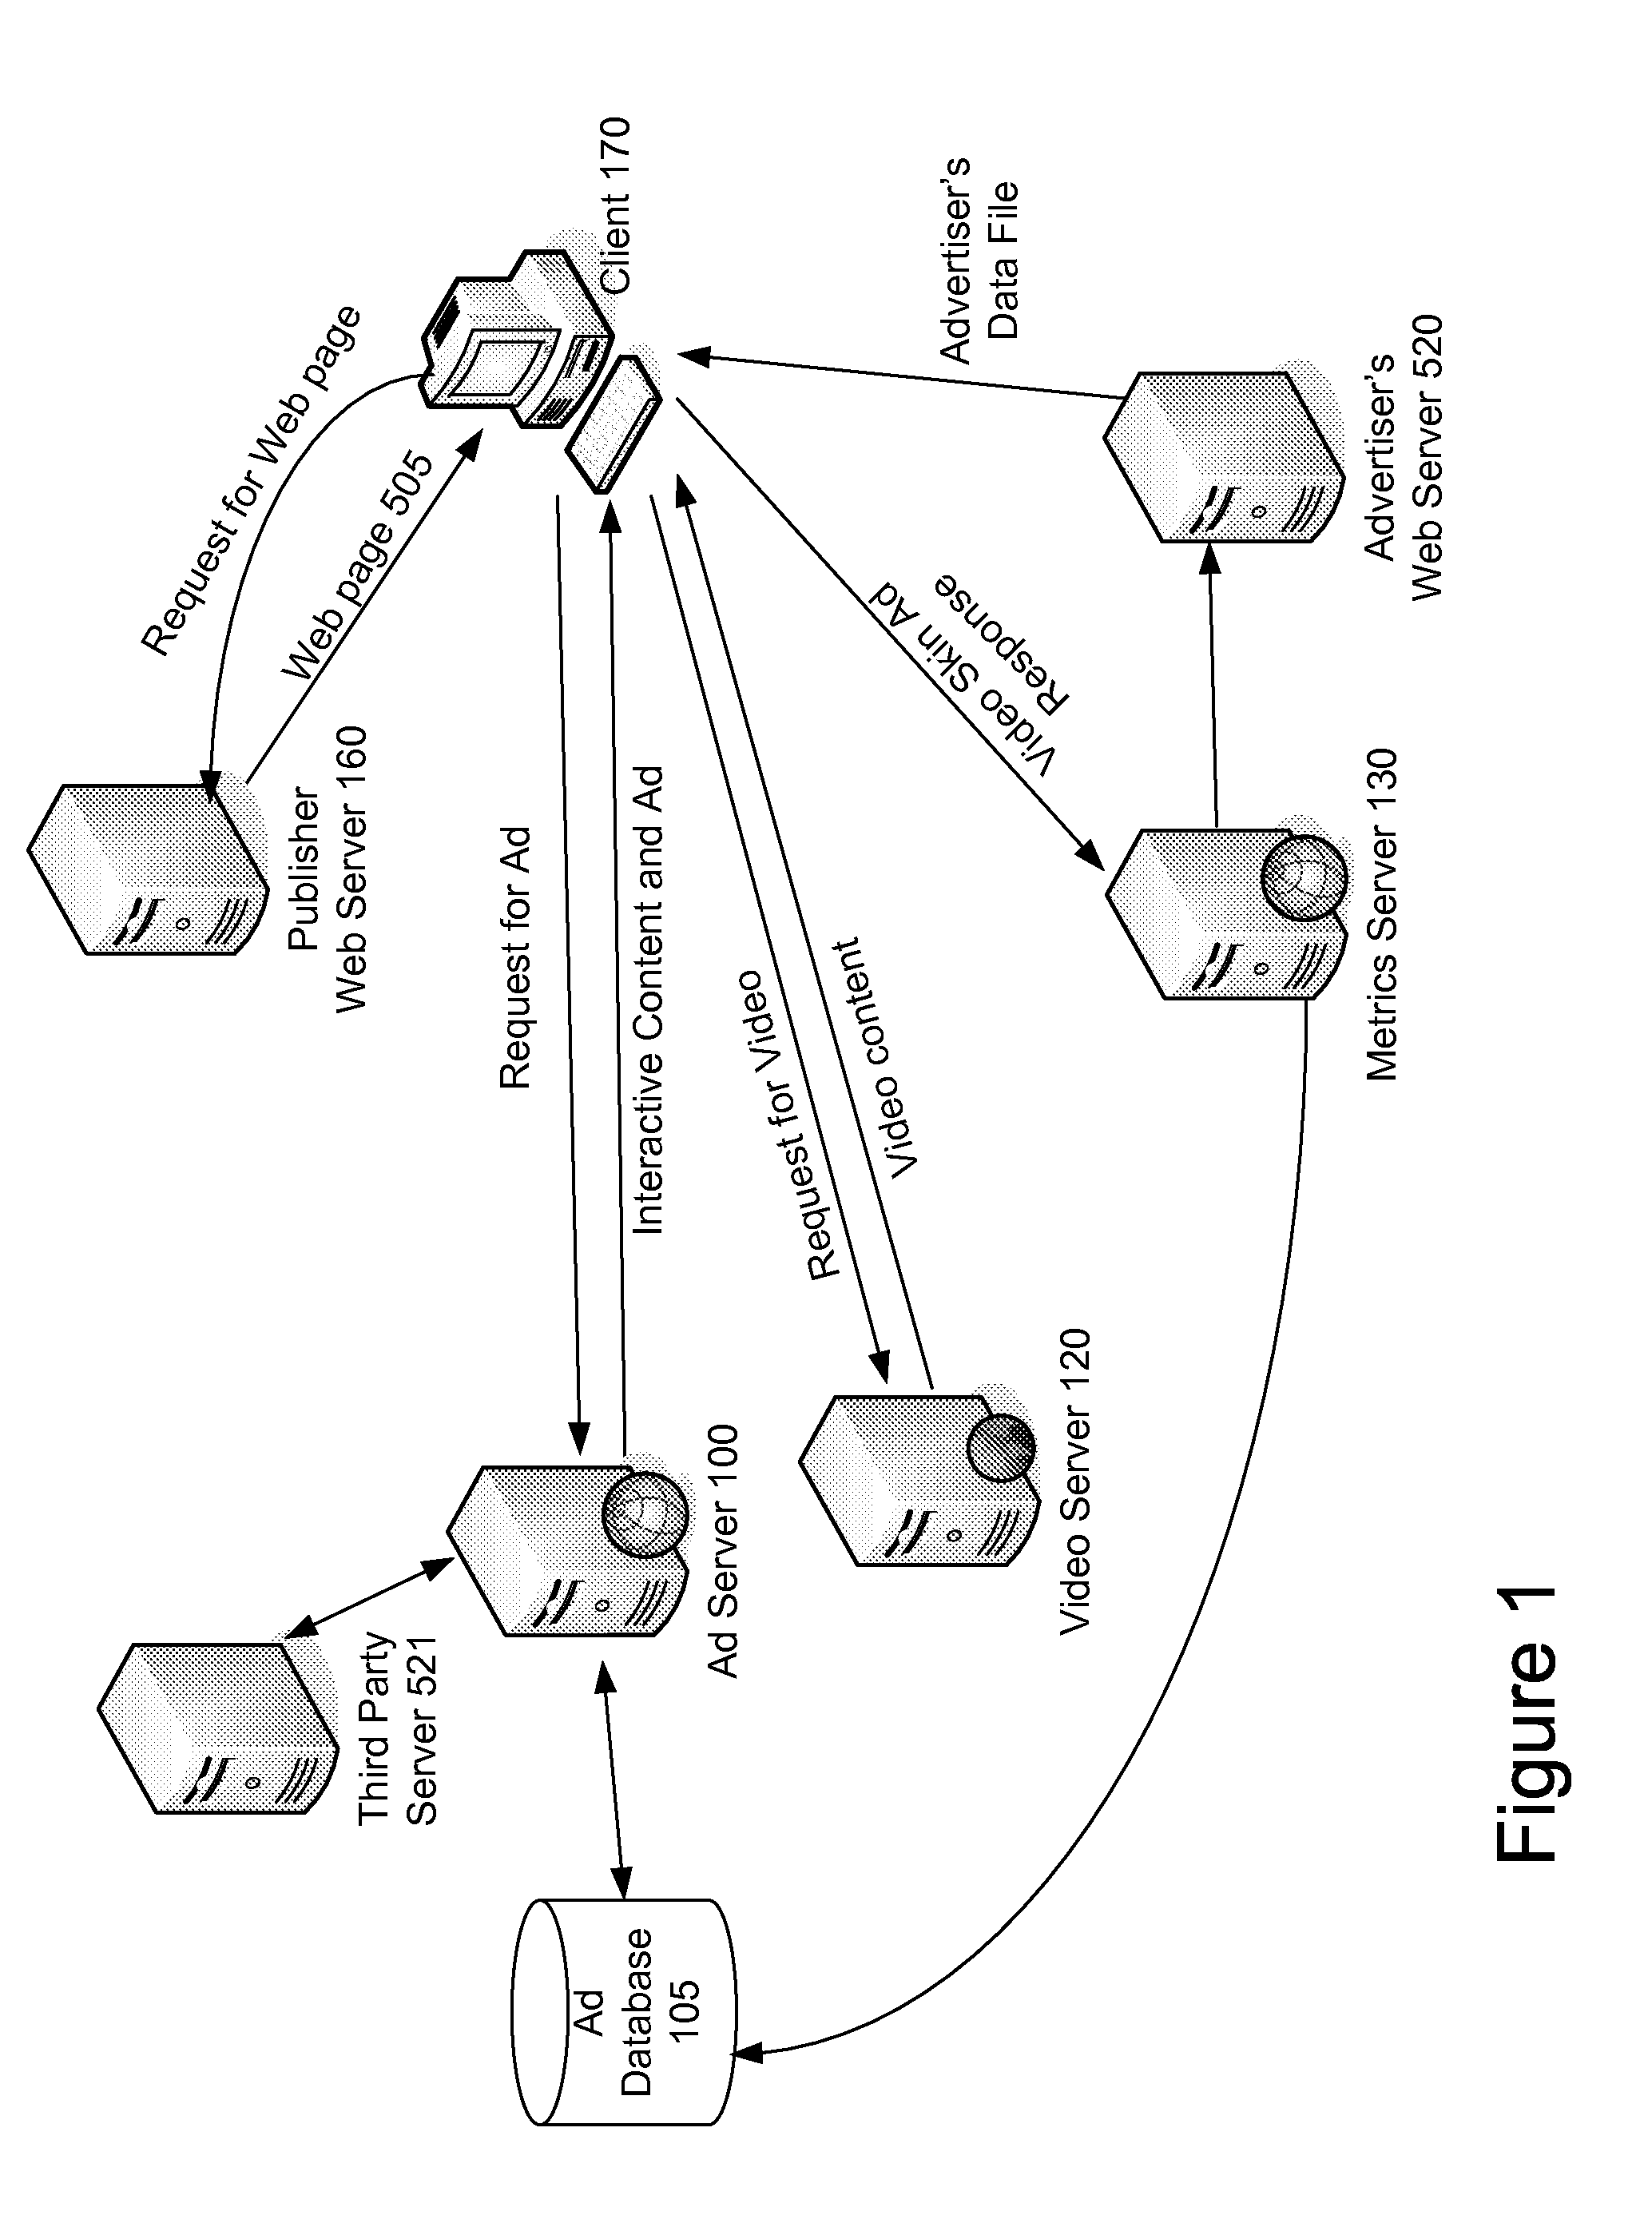 System and Method for Providing Interactive Content with Video Content